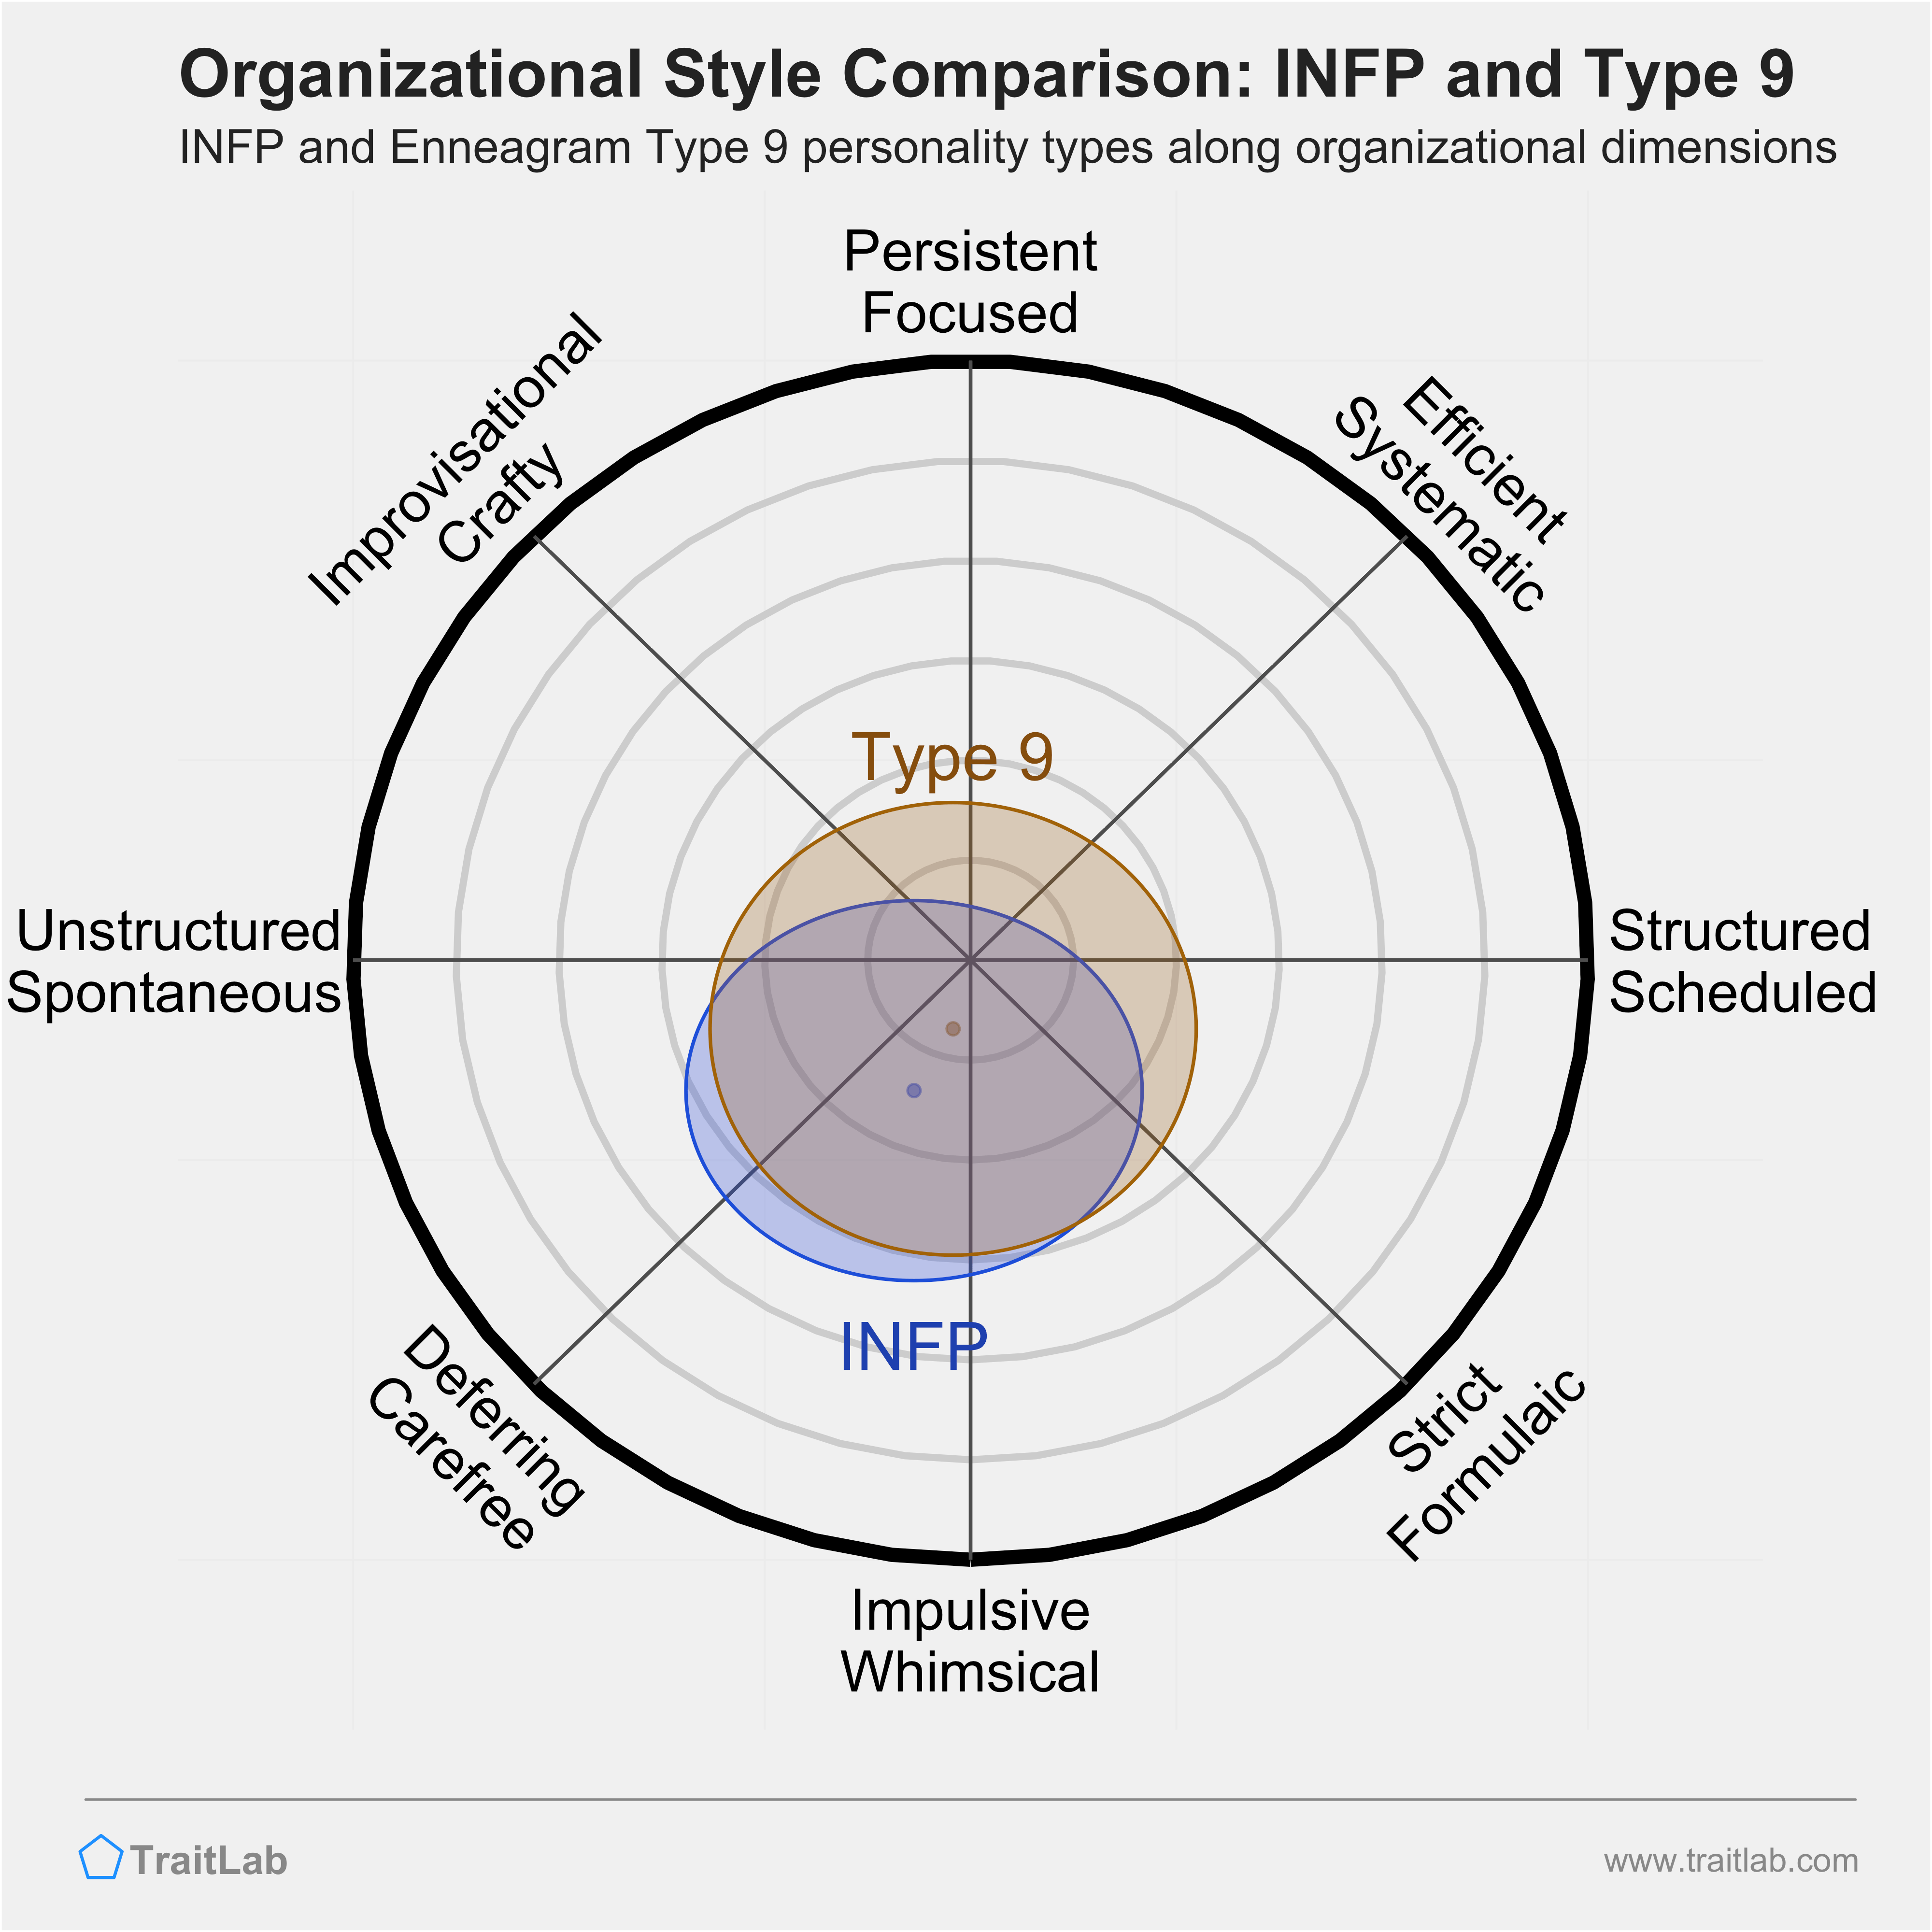 INFP and Type 9 comparison across organizational dimensions